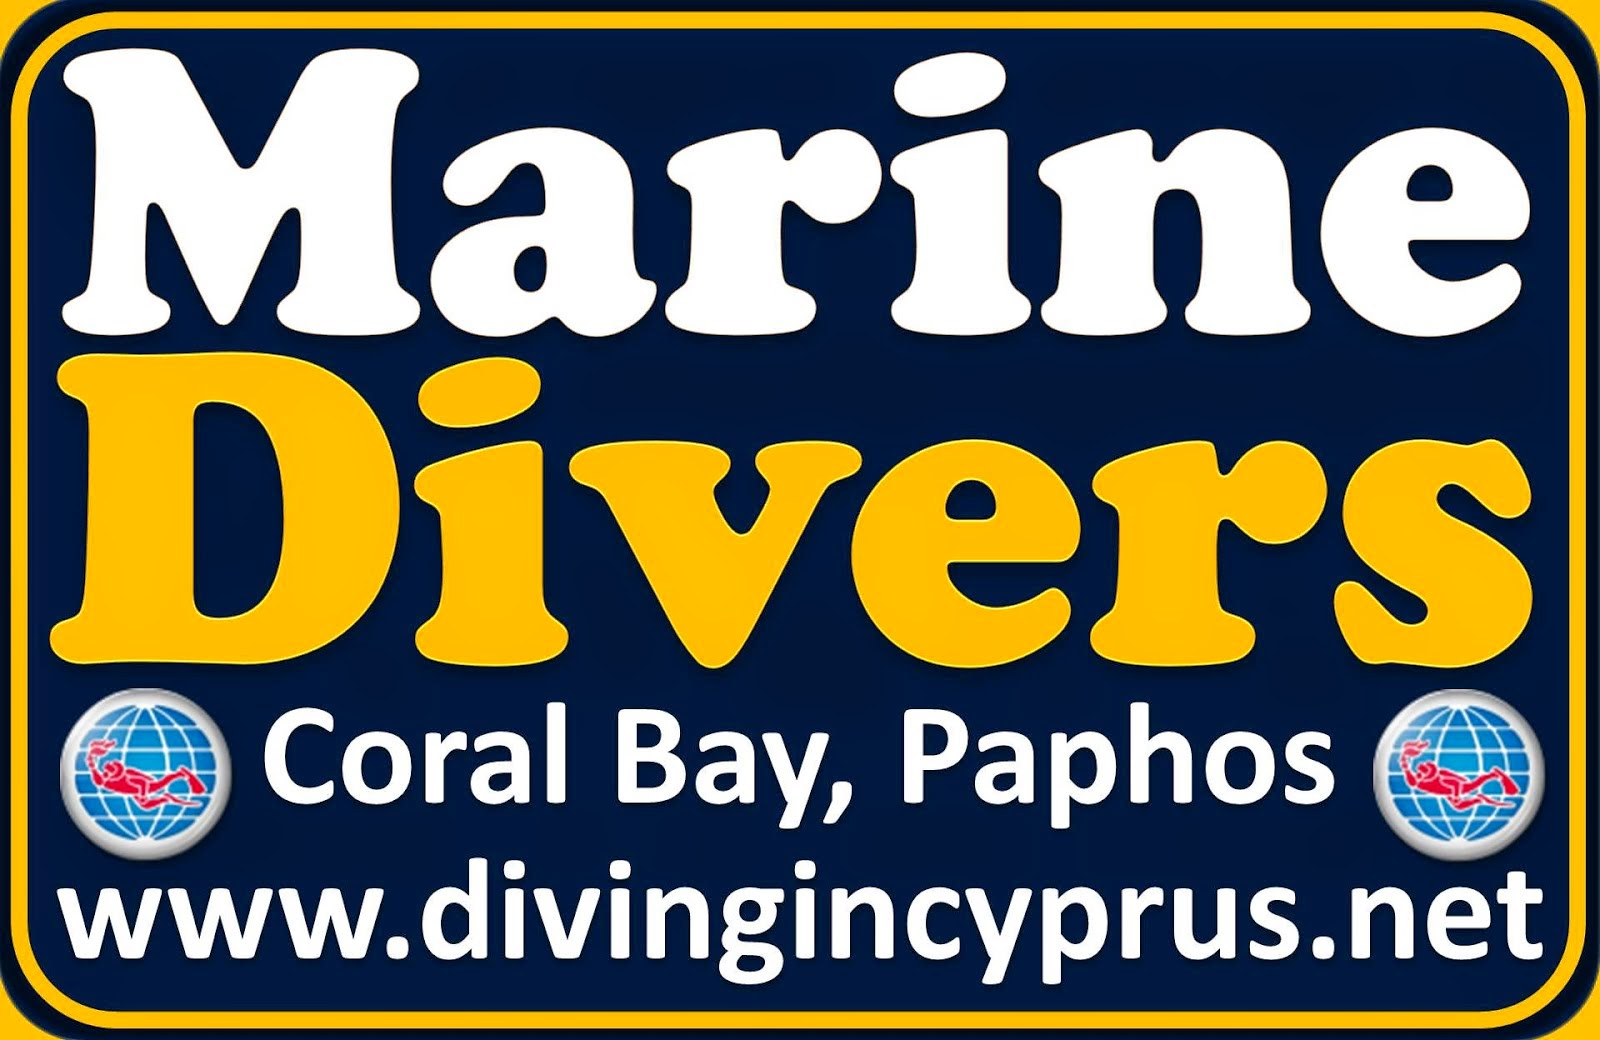 Scuba Diving In Cyprus, Paphos and Coral Bay